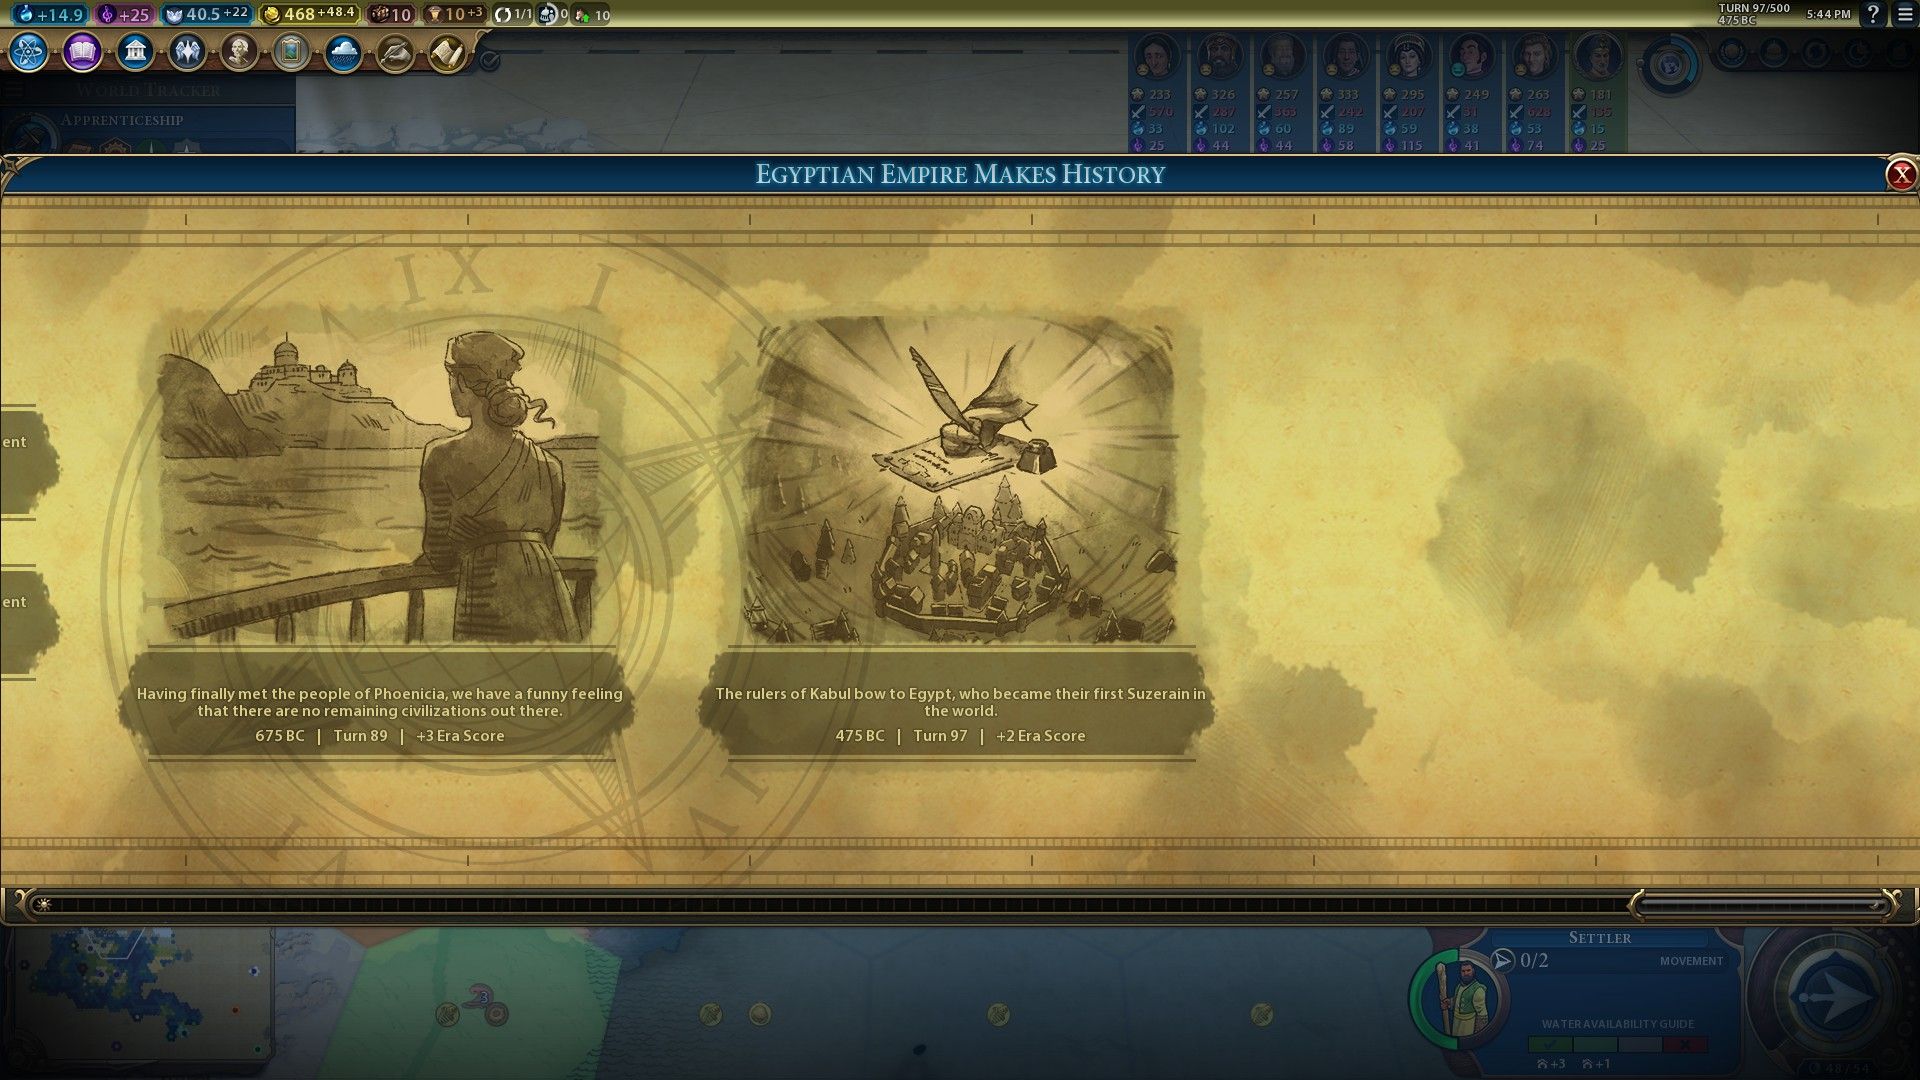 the Historic Moments timeline in Civilization 6